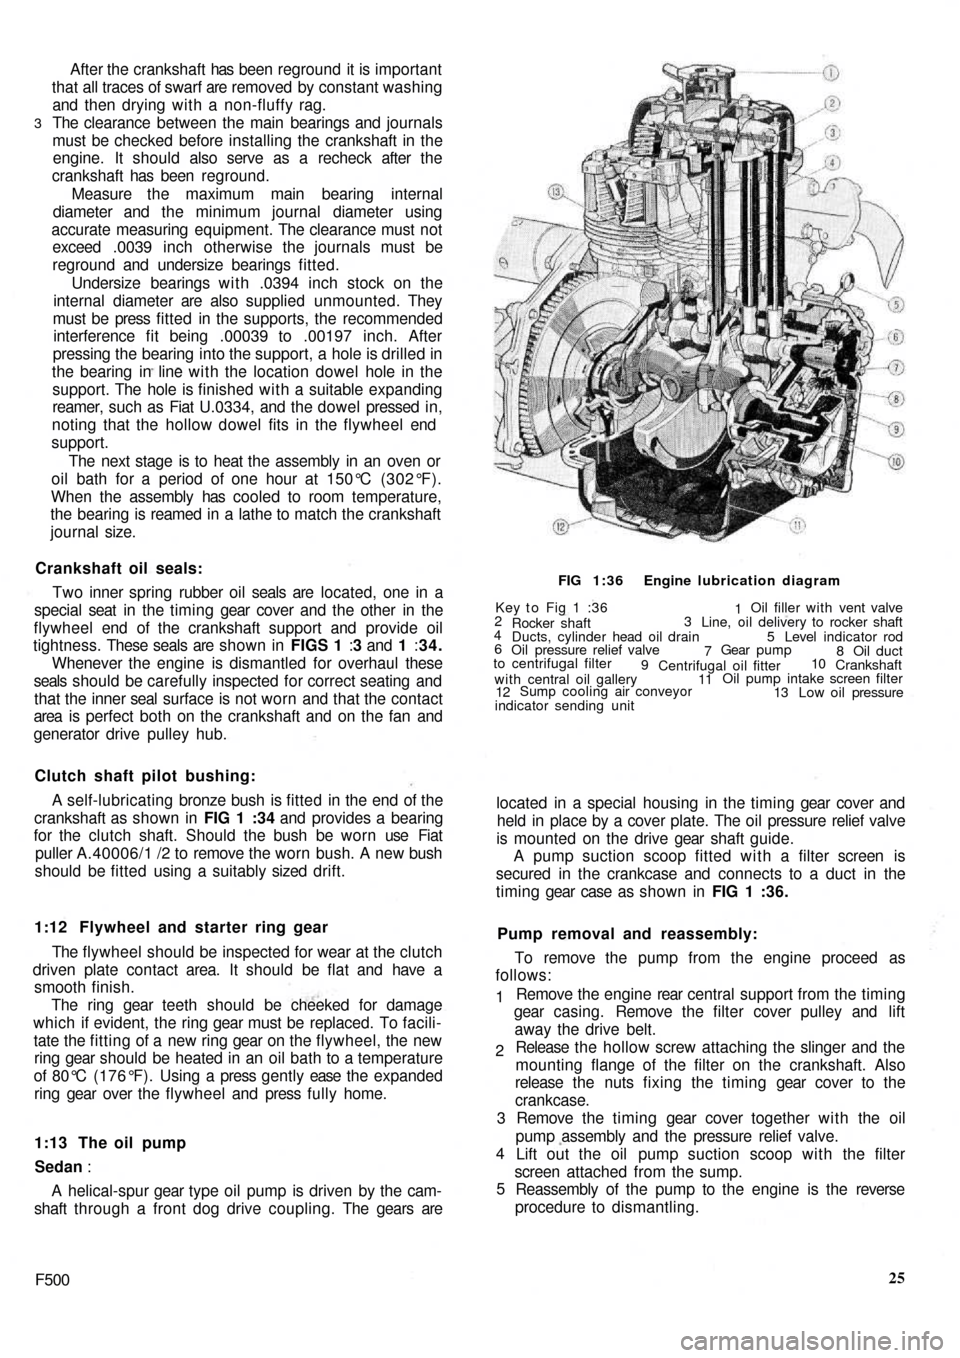 FIAT 500 1968 1.G Workshop Manual After the  crankshaft  has been reground  it is important
that all traces of swarf are removed  by constant washing
and then drying with a non-fluffy rag.
The clearance between the main bearings and j